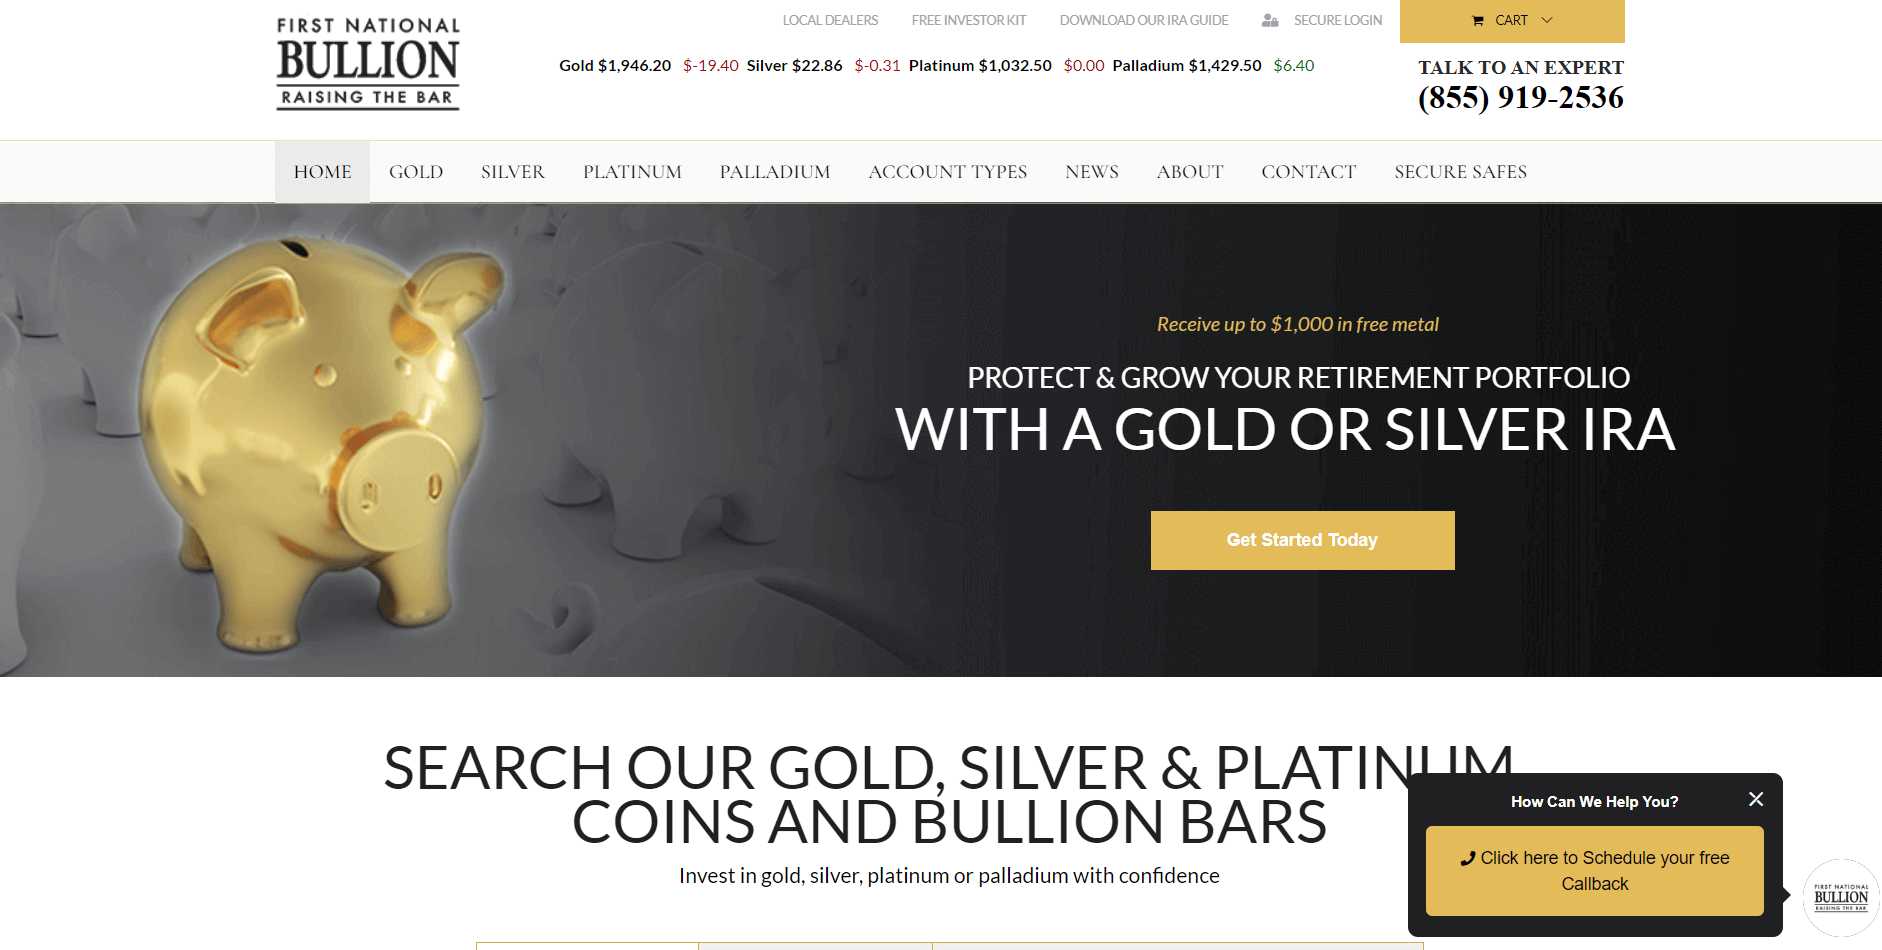 first national bullion gold ira review homepage